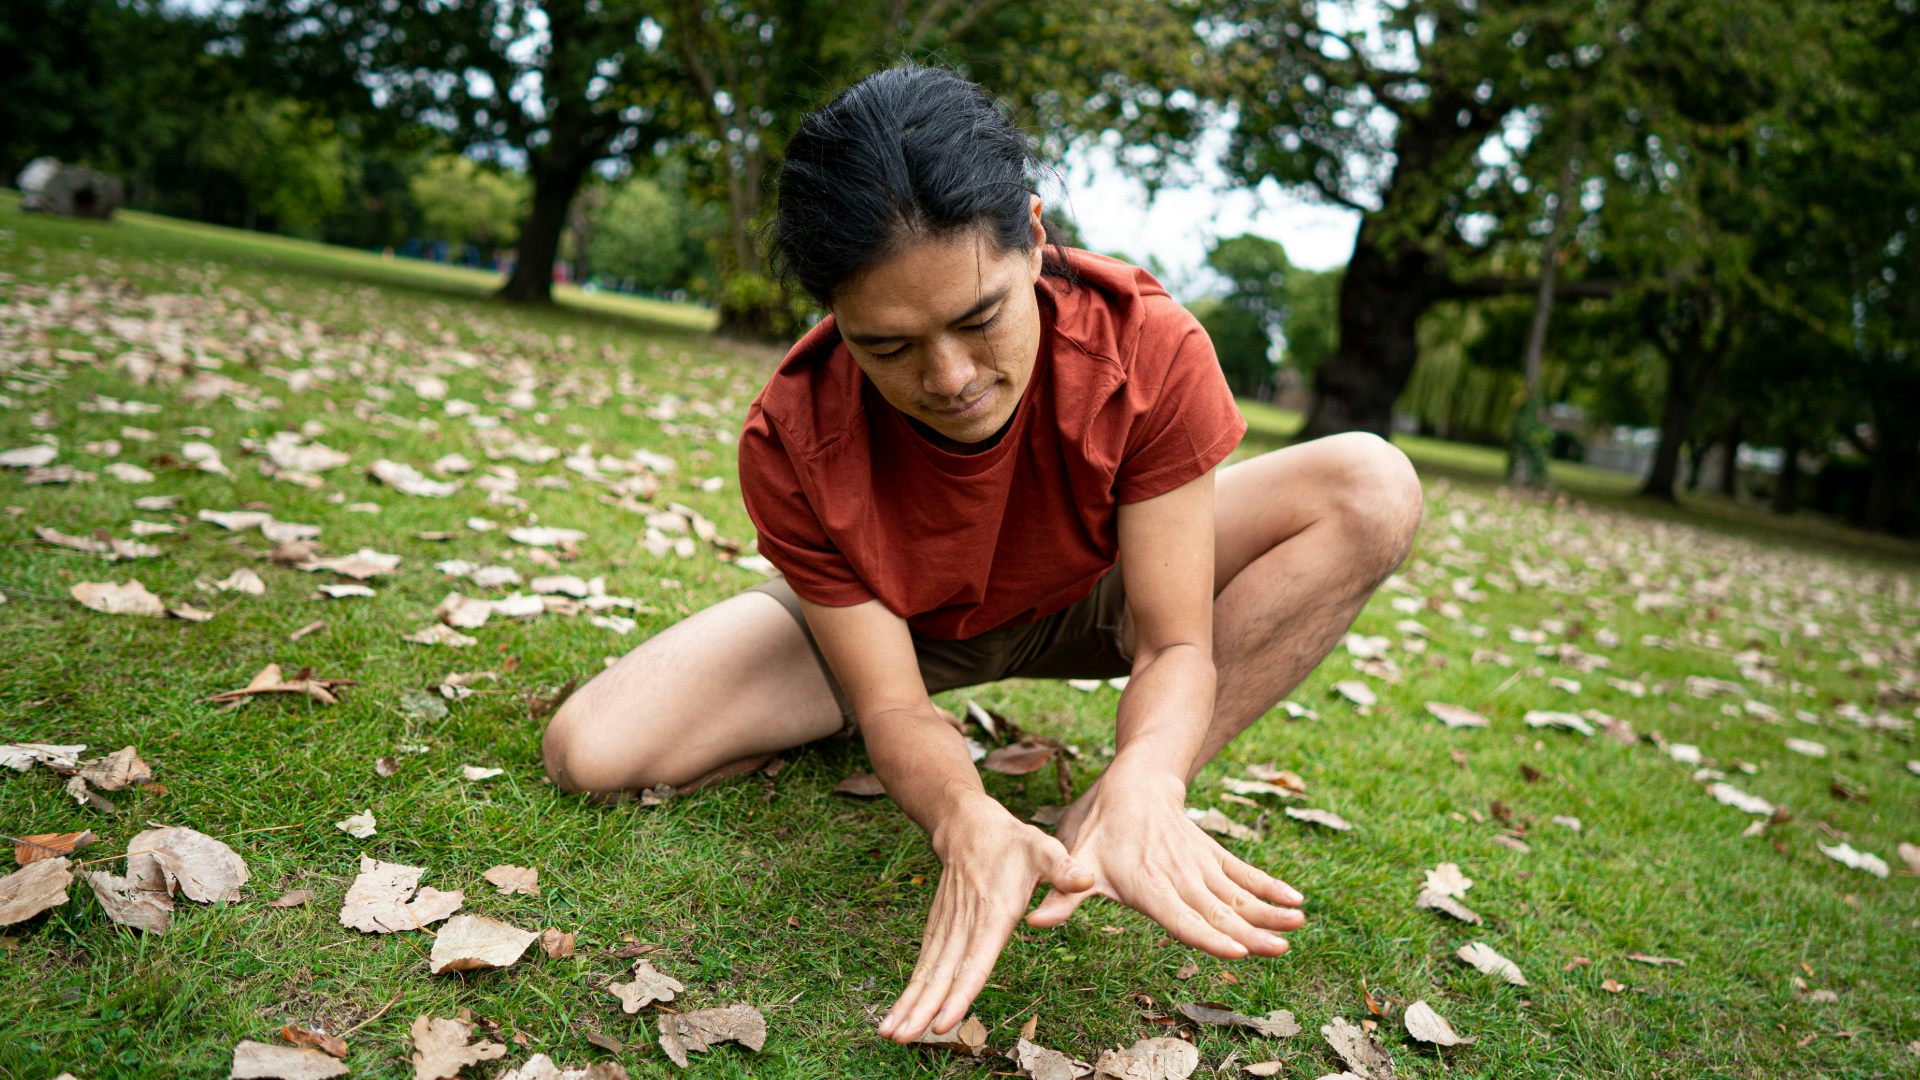 A man, crouched down on the grass, puts his hands together in the shape of a butterfly.